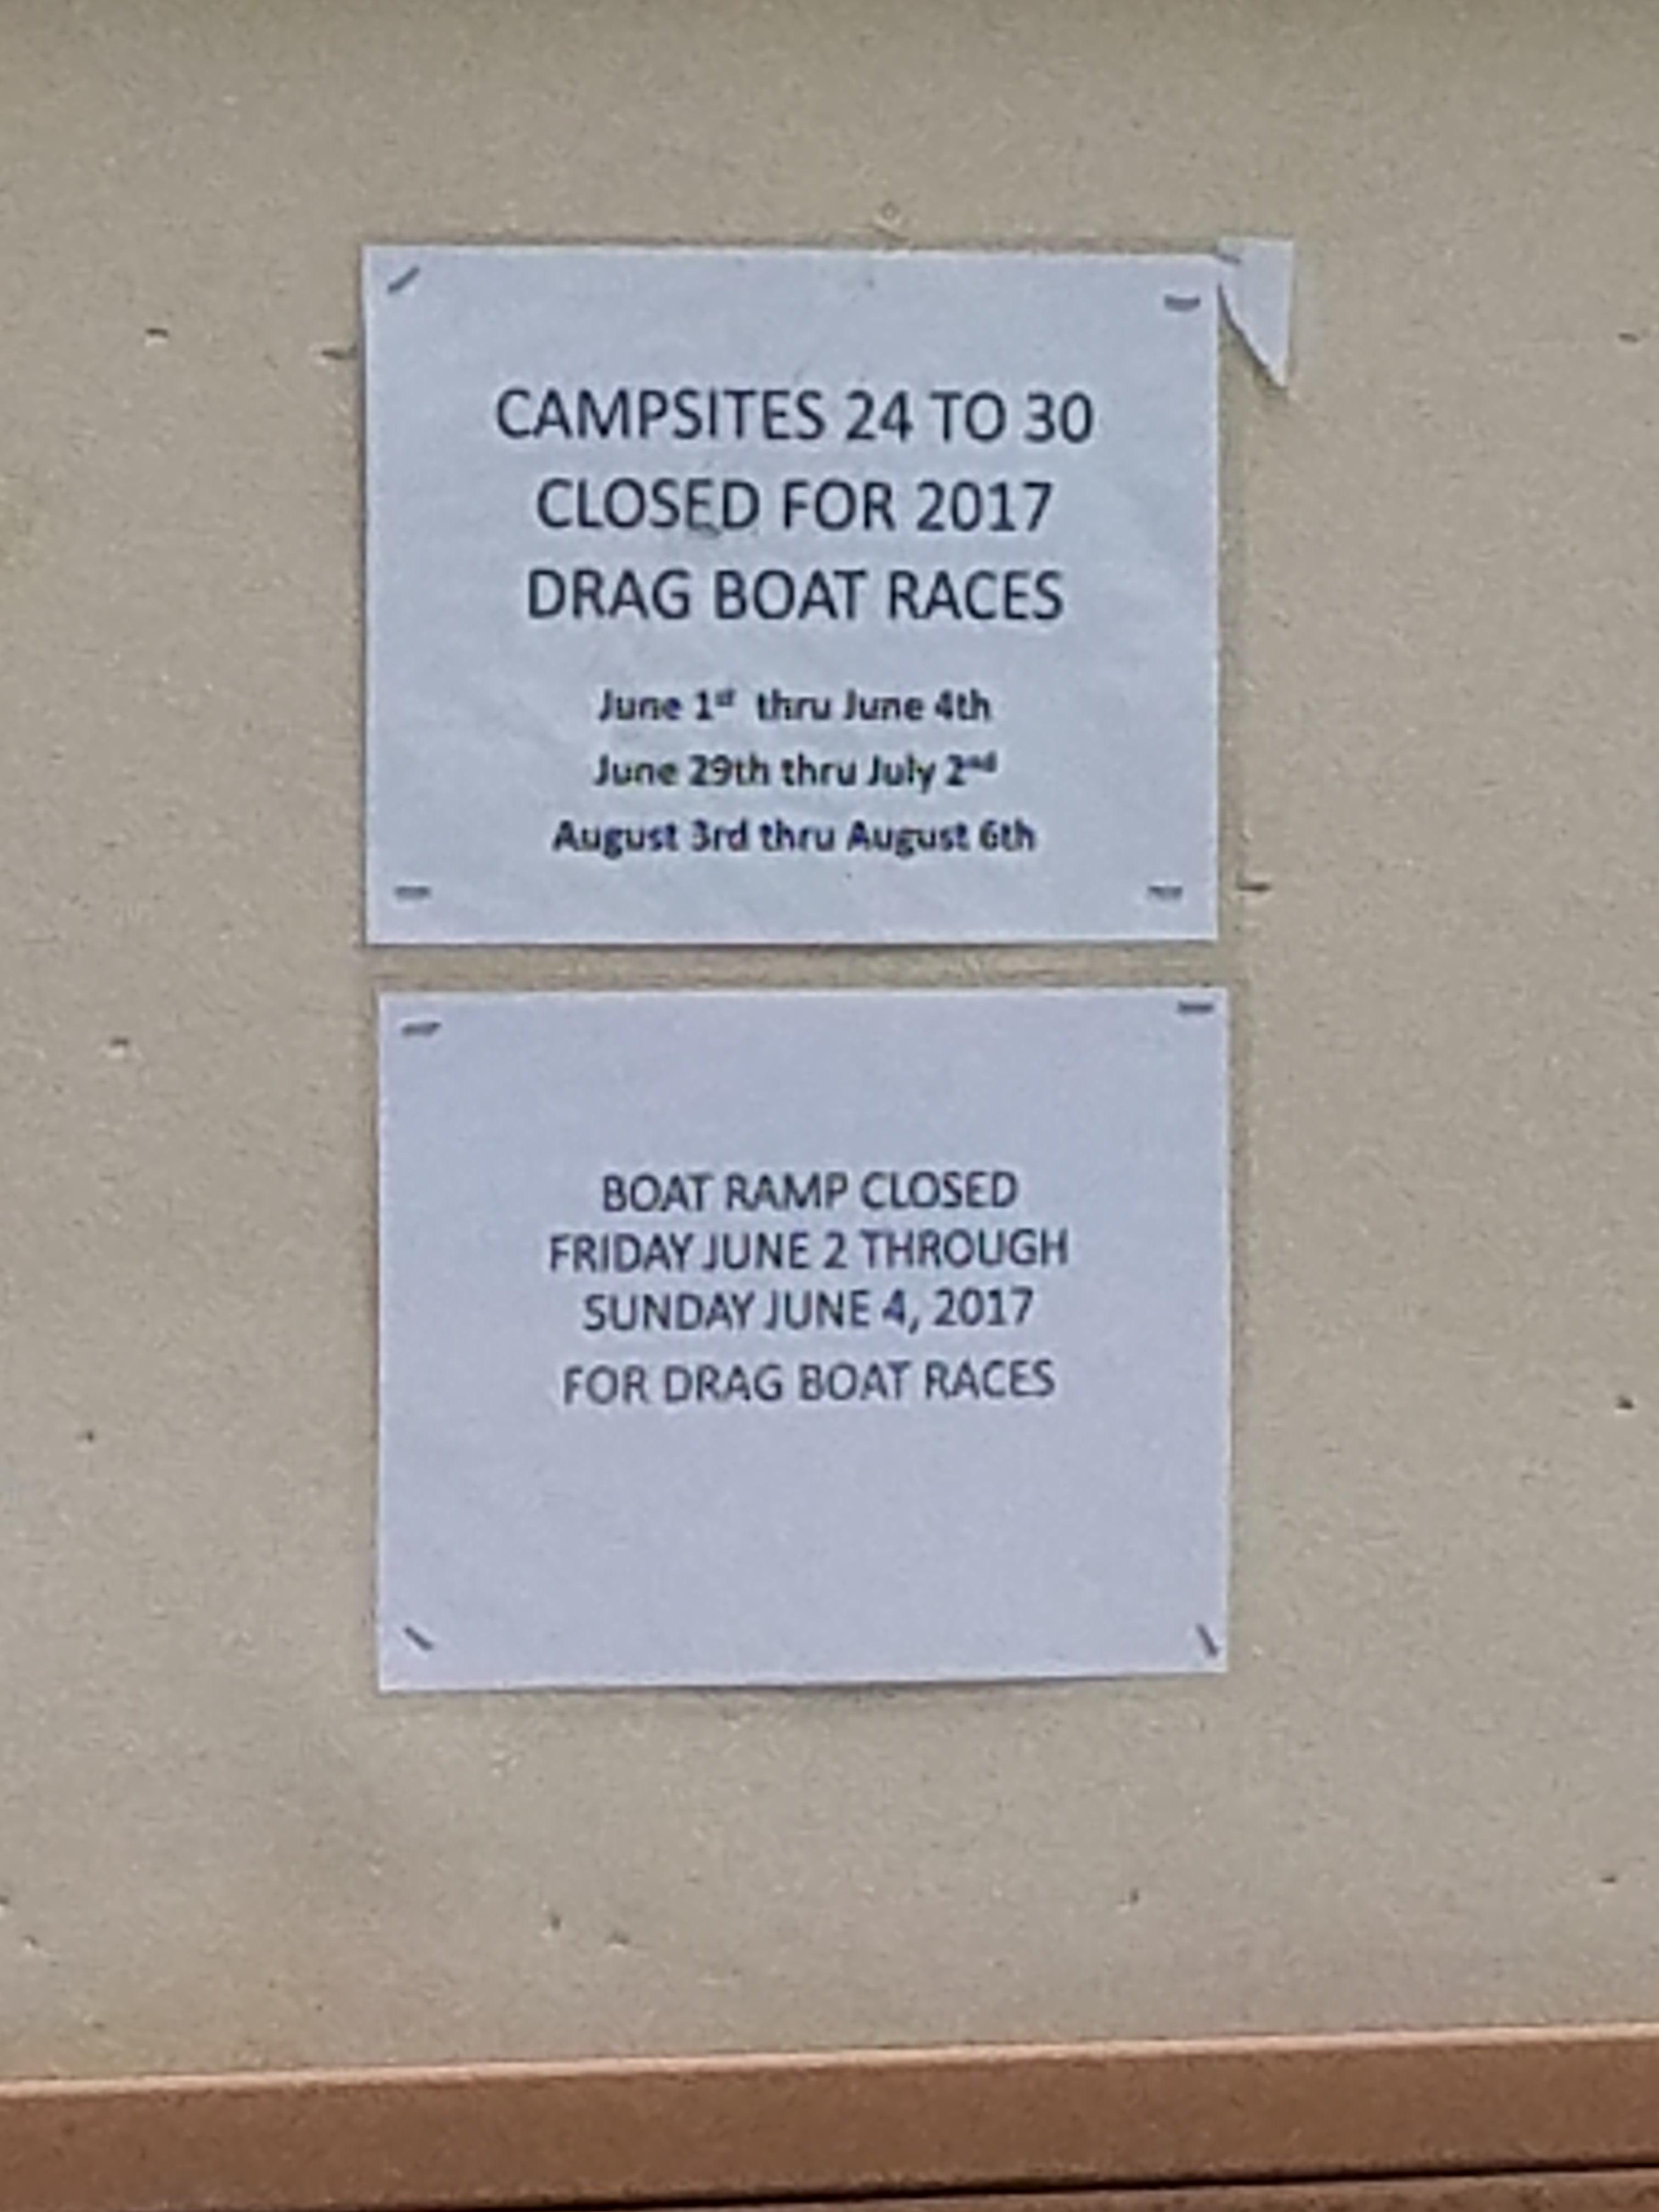 So basically the boat ramp and the entire "new side" of the campground is closed during boat races, unless you make a reservation with Kentucky Drag Boat Racing Association.  I don't boat race, so I have no information on that, but I know you cannot get into Birmingham Ferry during racing events.... you may try Smith    Bay campground-it's just down the Trace and south on the shore line.